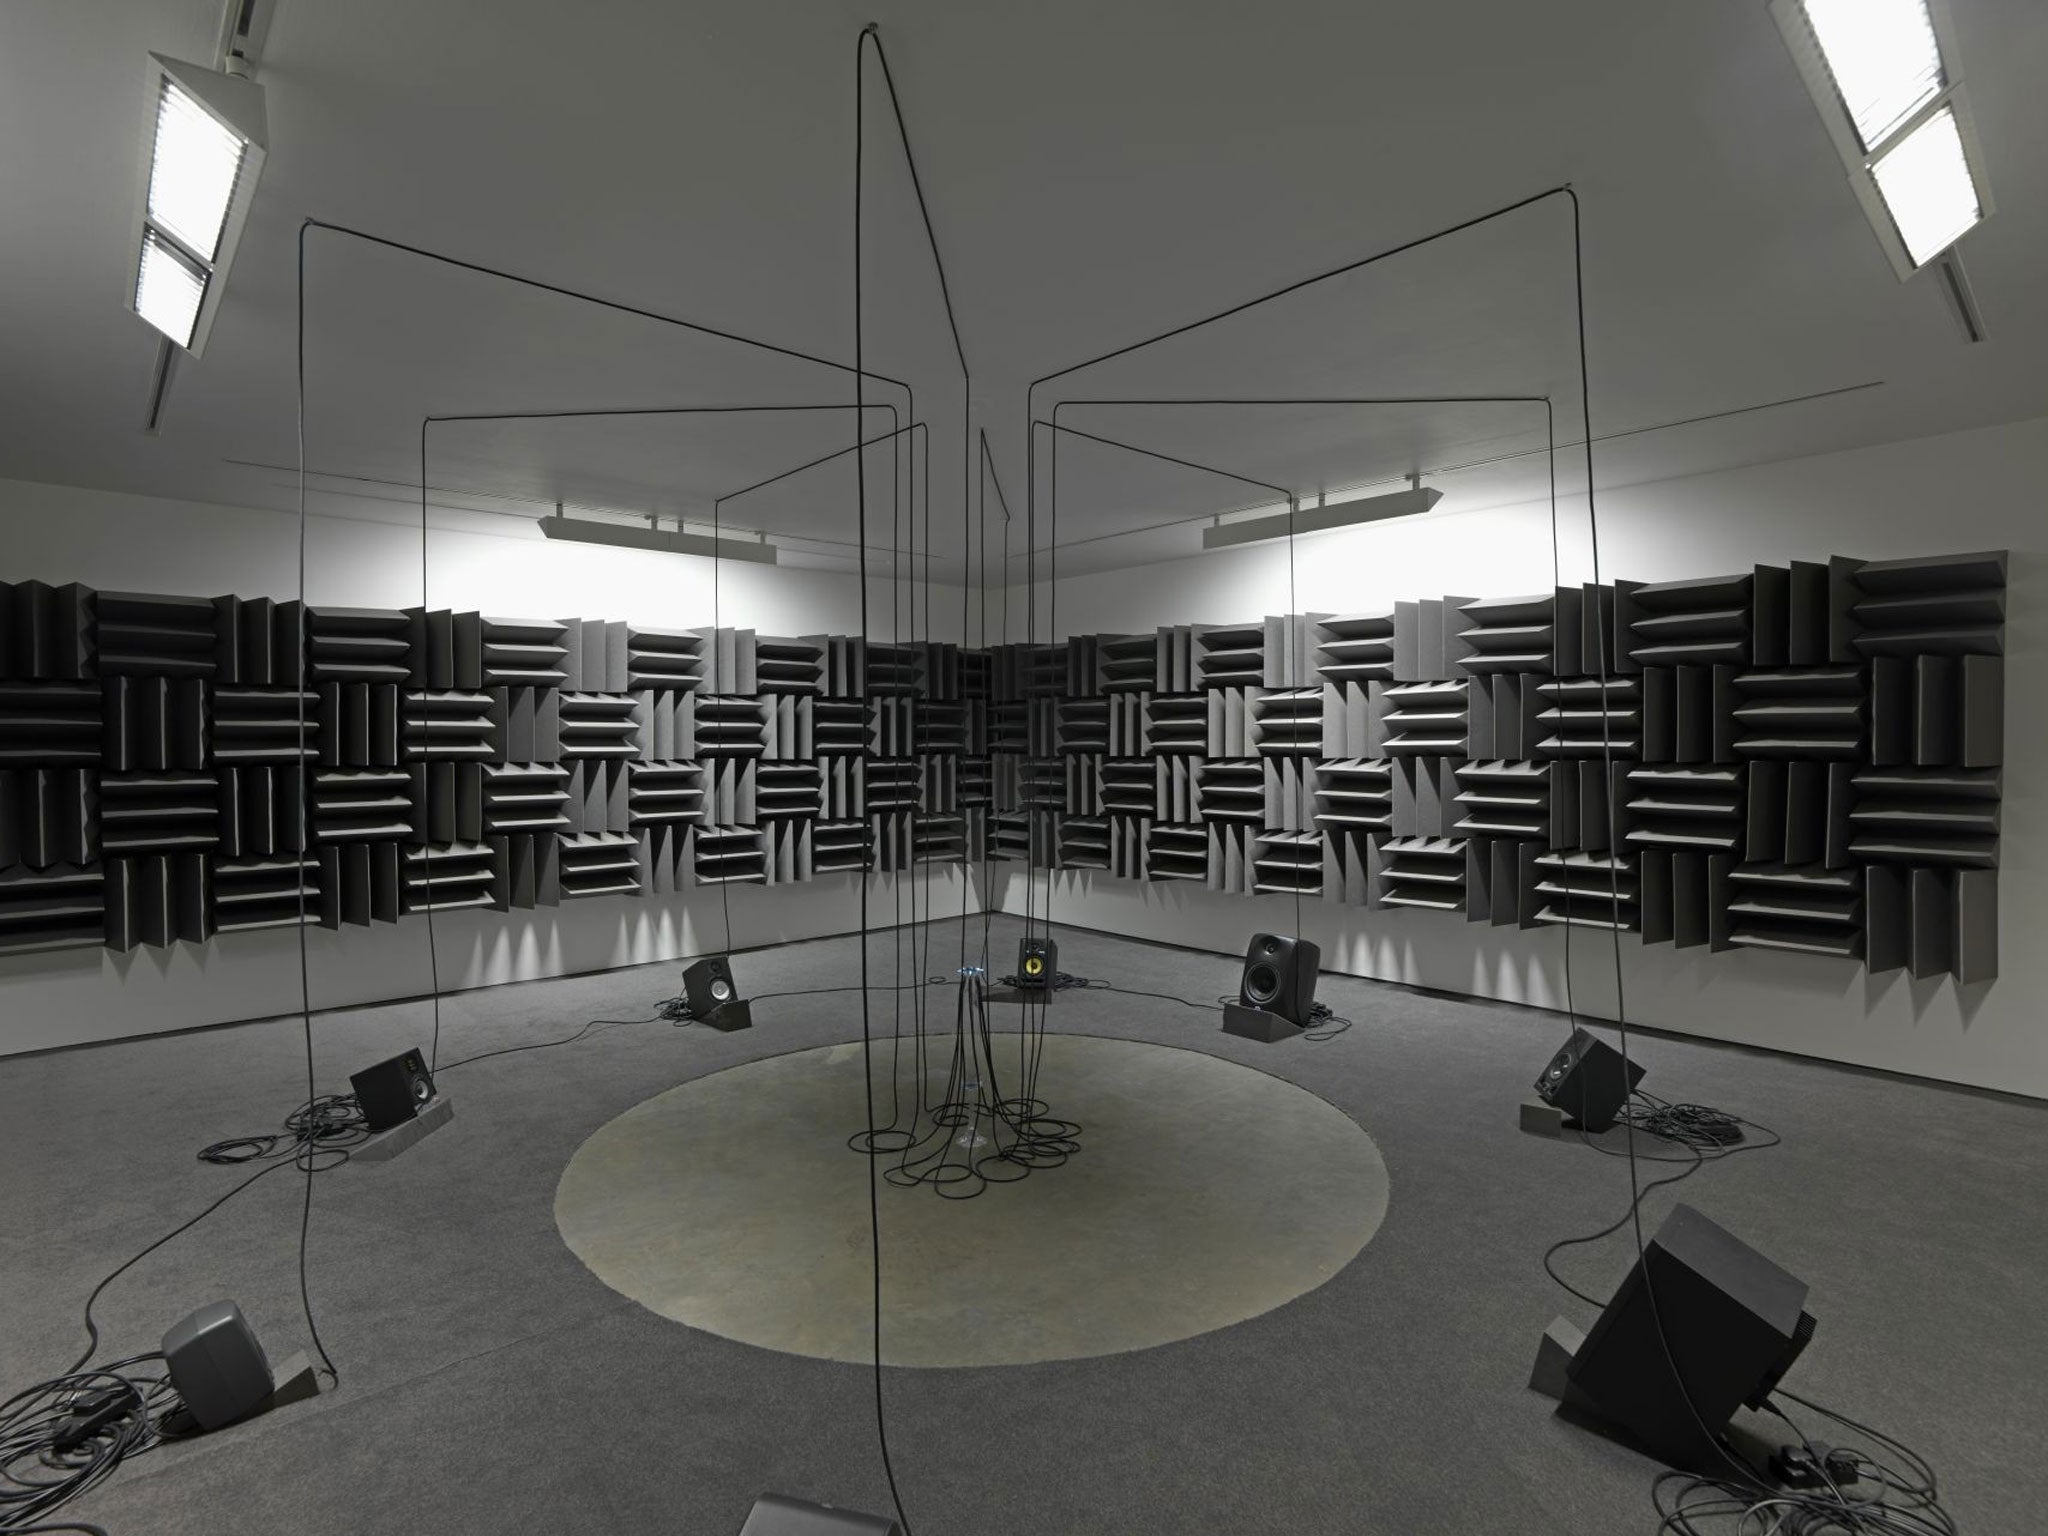 Haroon Mirza has transformed a space at London's Lisson Gallery into a gleaming symphony of light